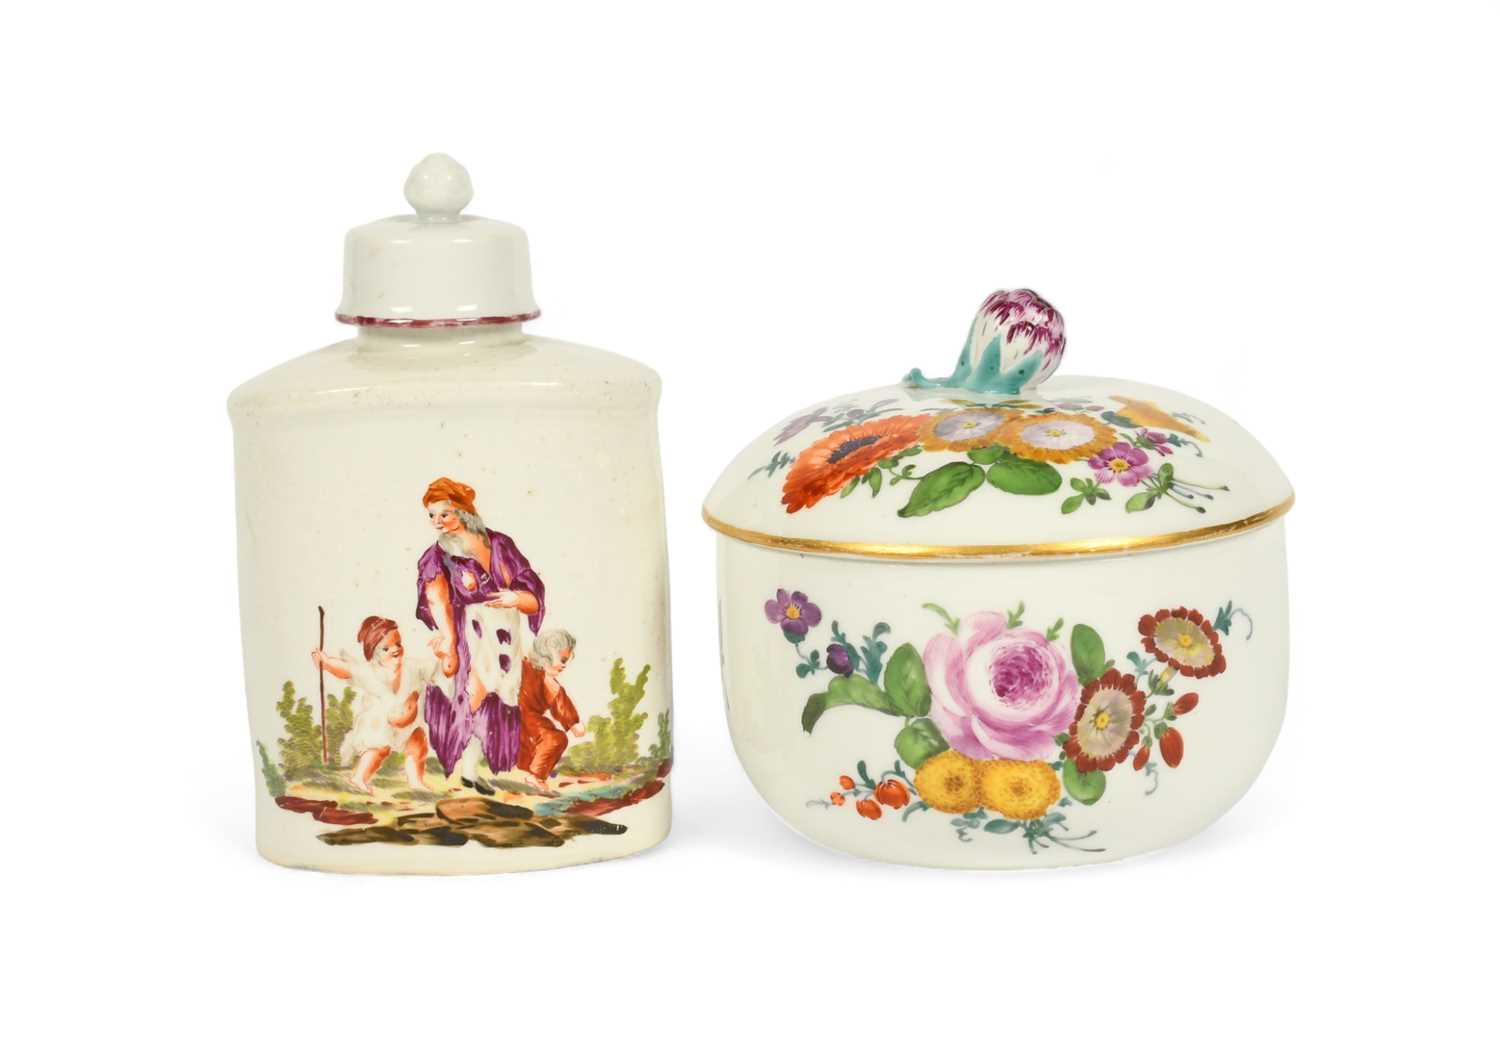 A Limbach tea canister and cover, c.1780, one side painted with a ragged mother and two children,